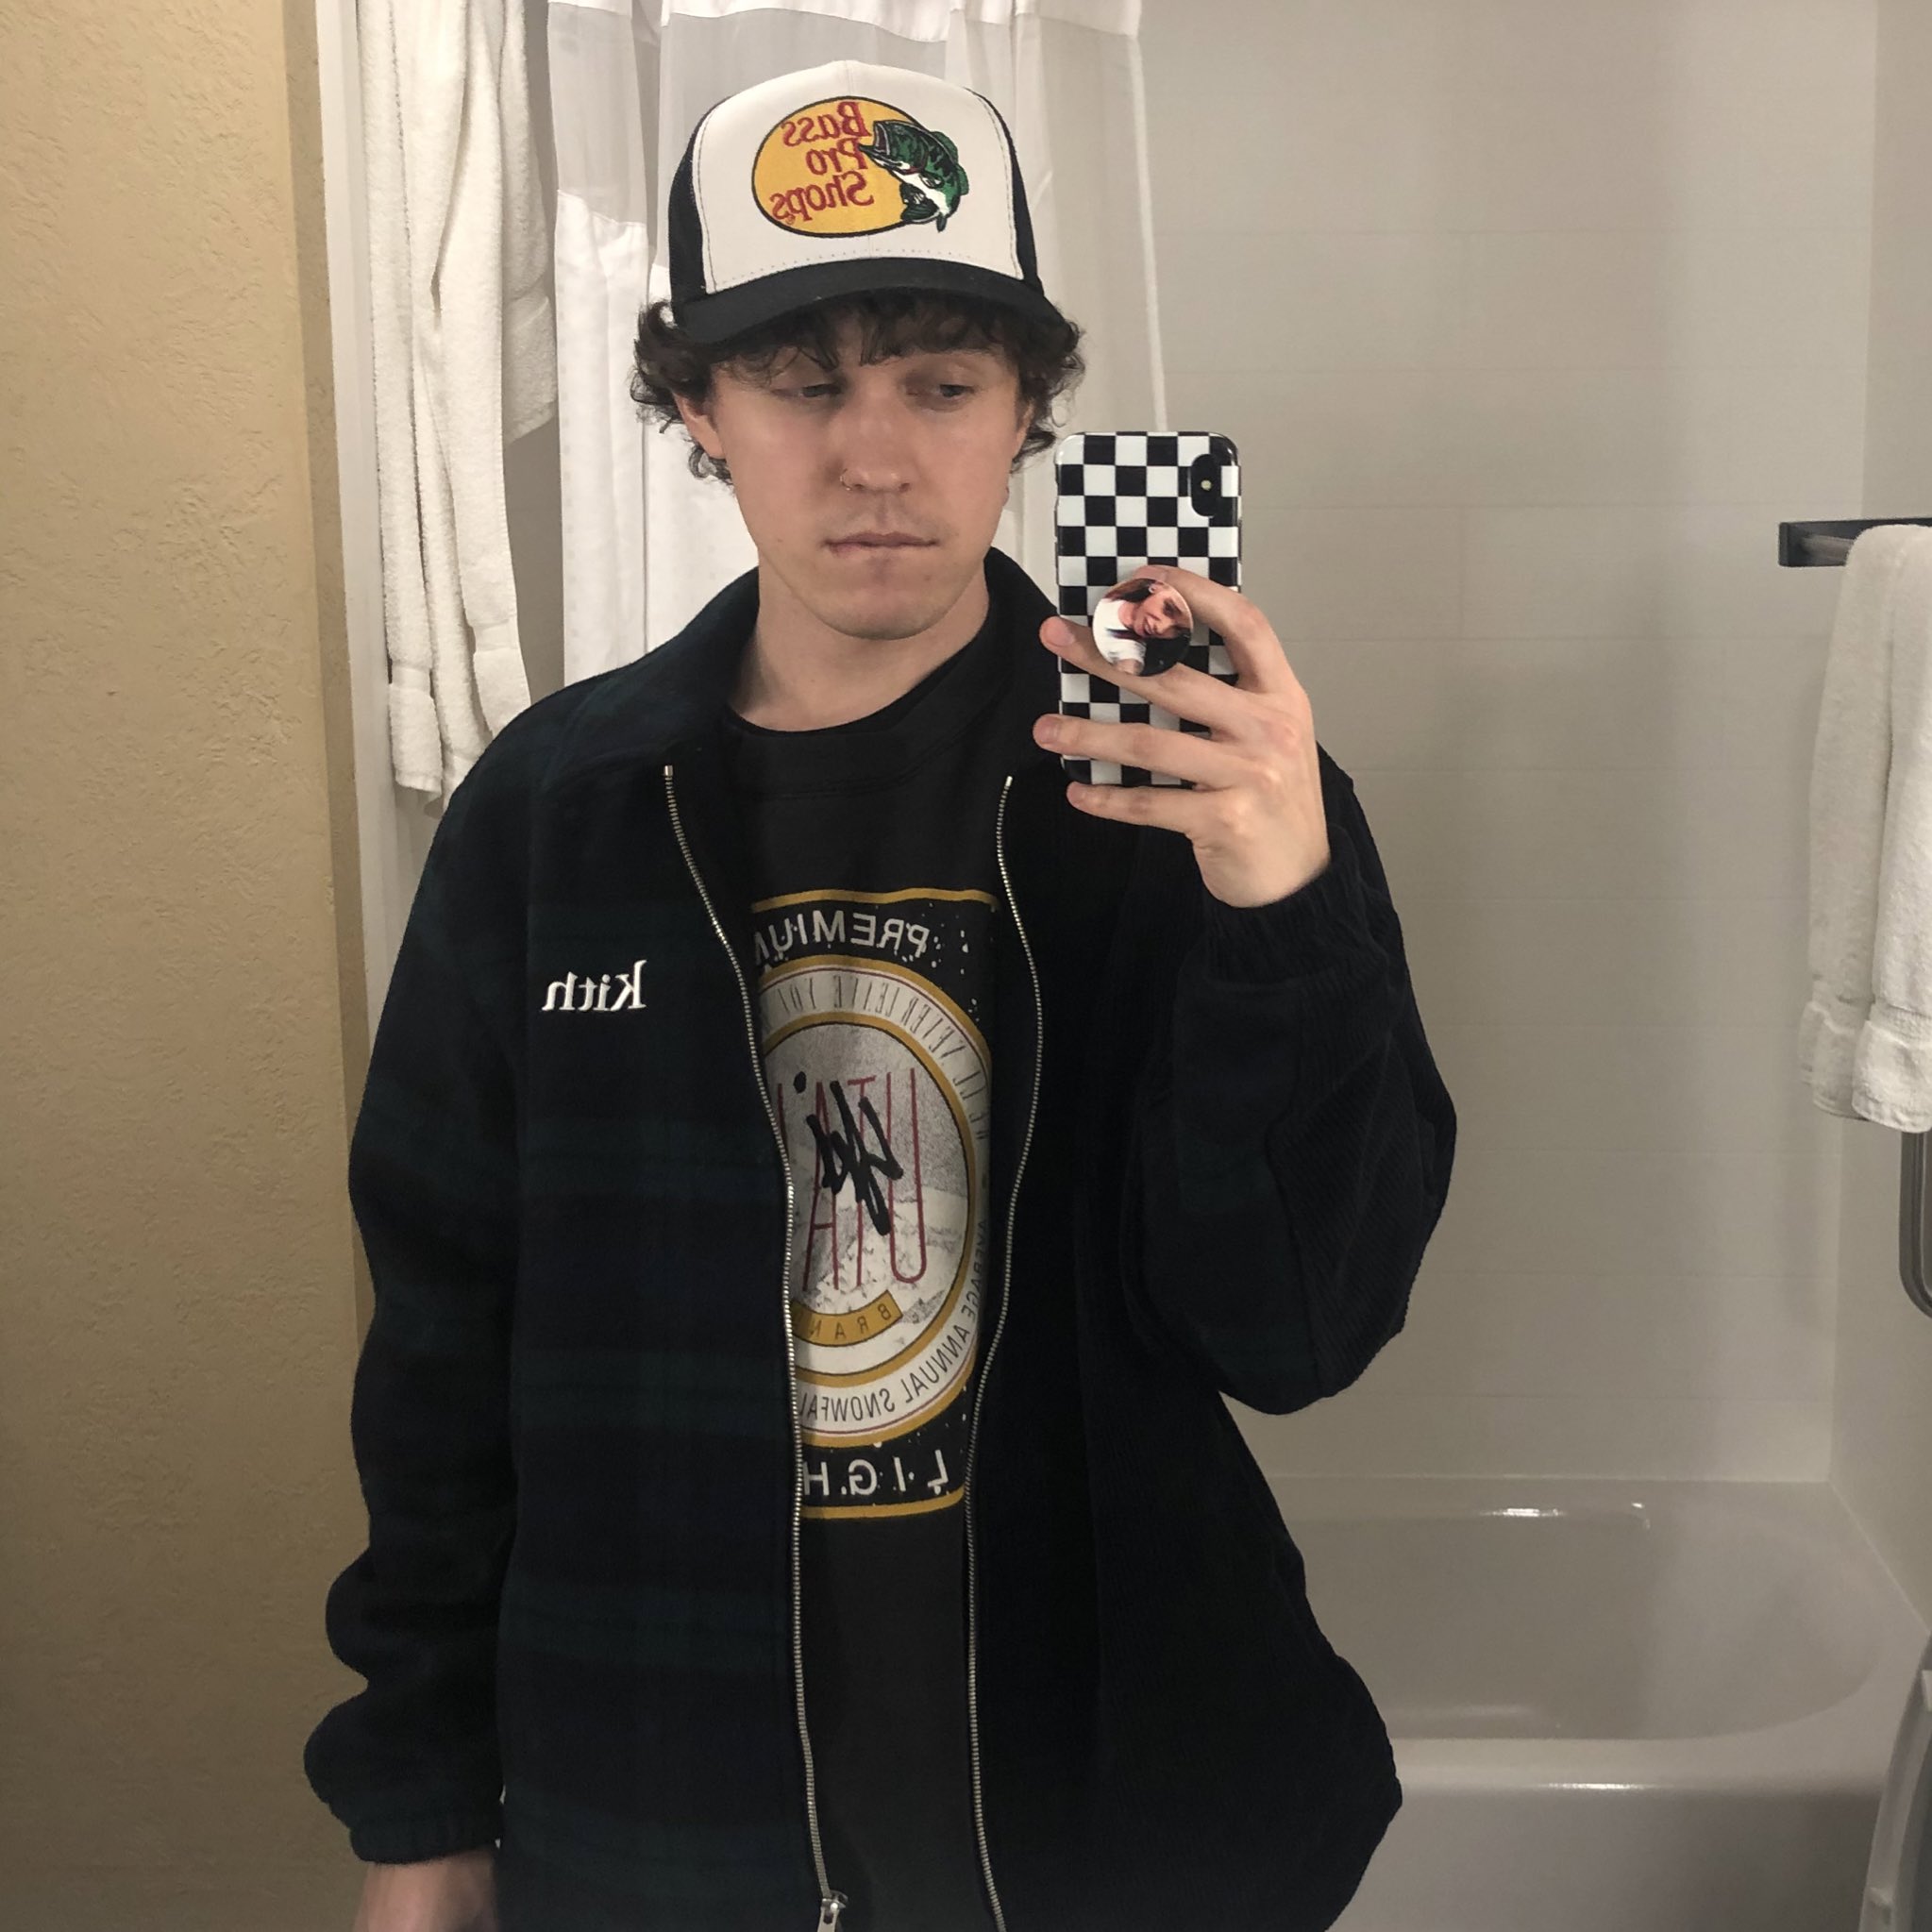 kurtis conner on X: ayo someone got me a bass pro shops hat as a joke  because I made fun of people who wear them and now I can't stop  unironically wearing